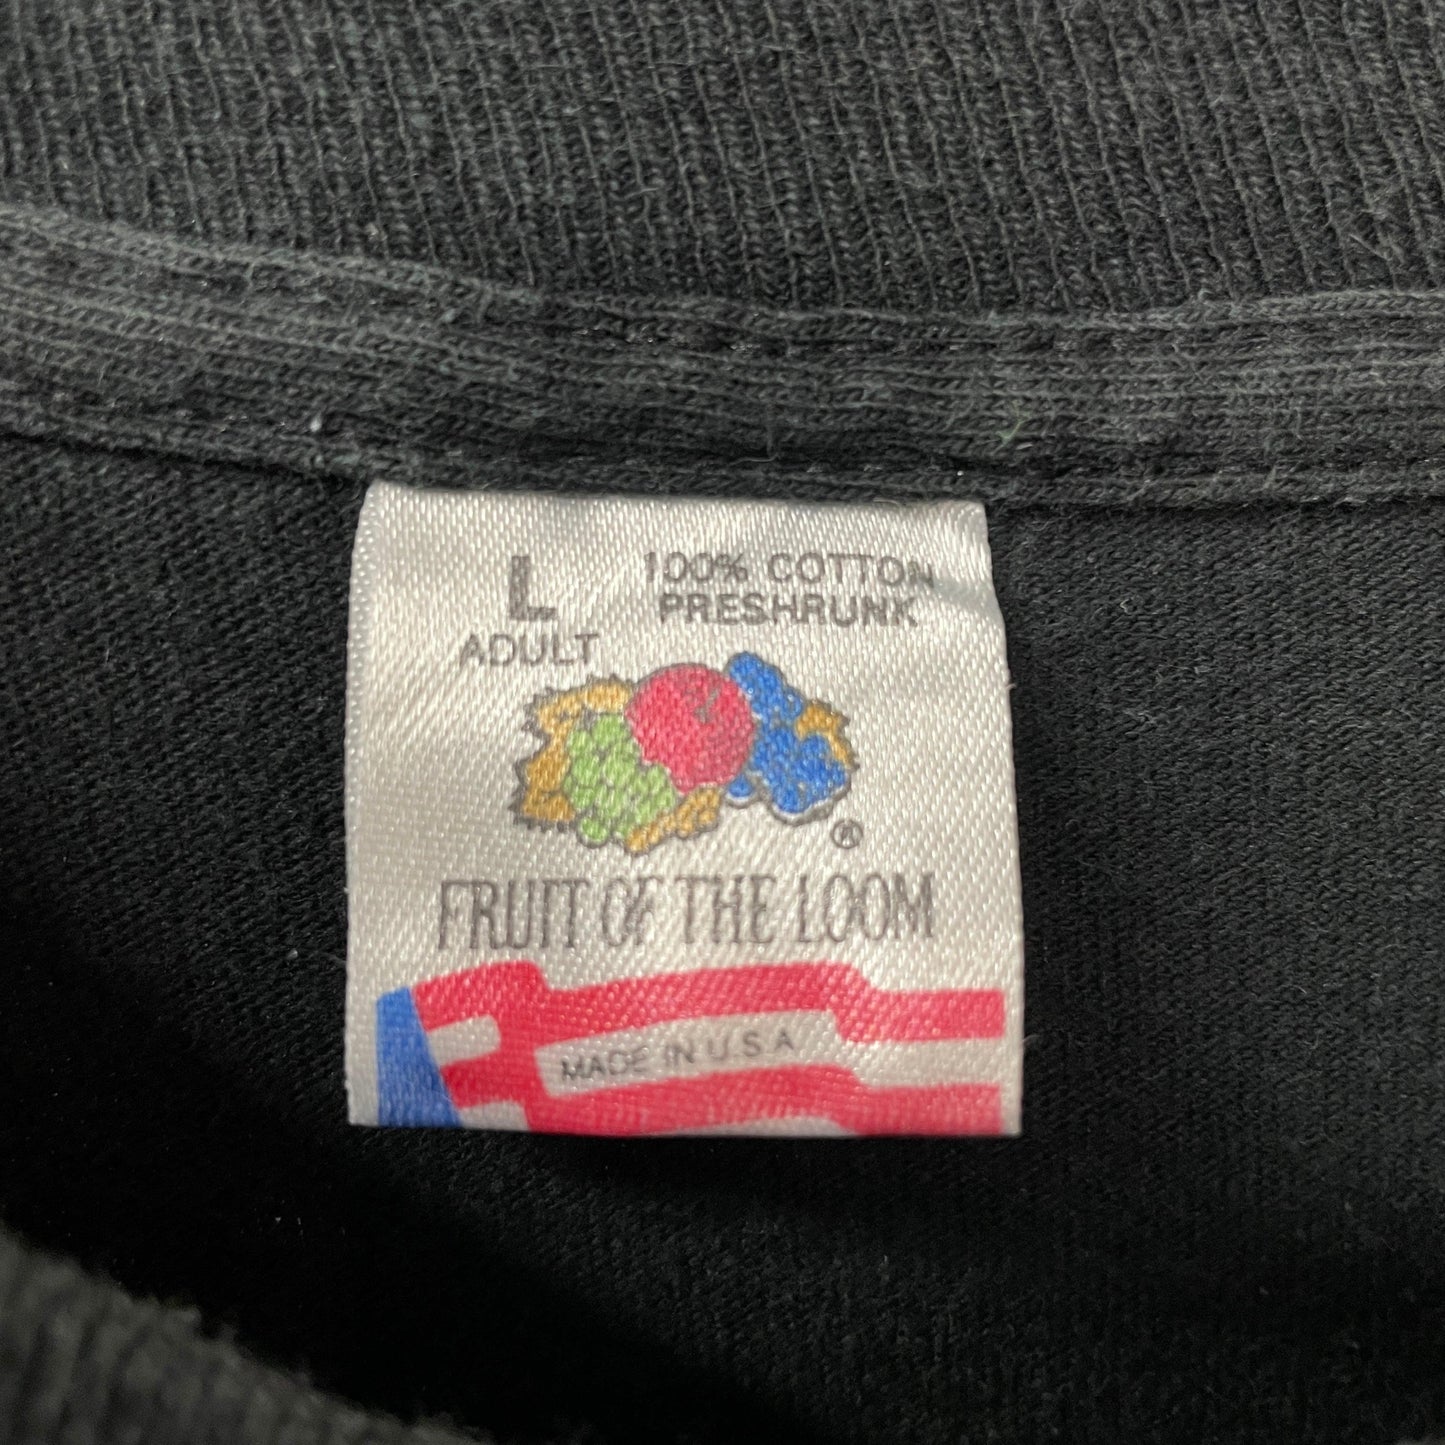 90s fruit of the loom Tee Tシャツbシングルステッチ